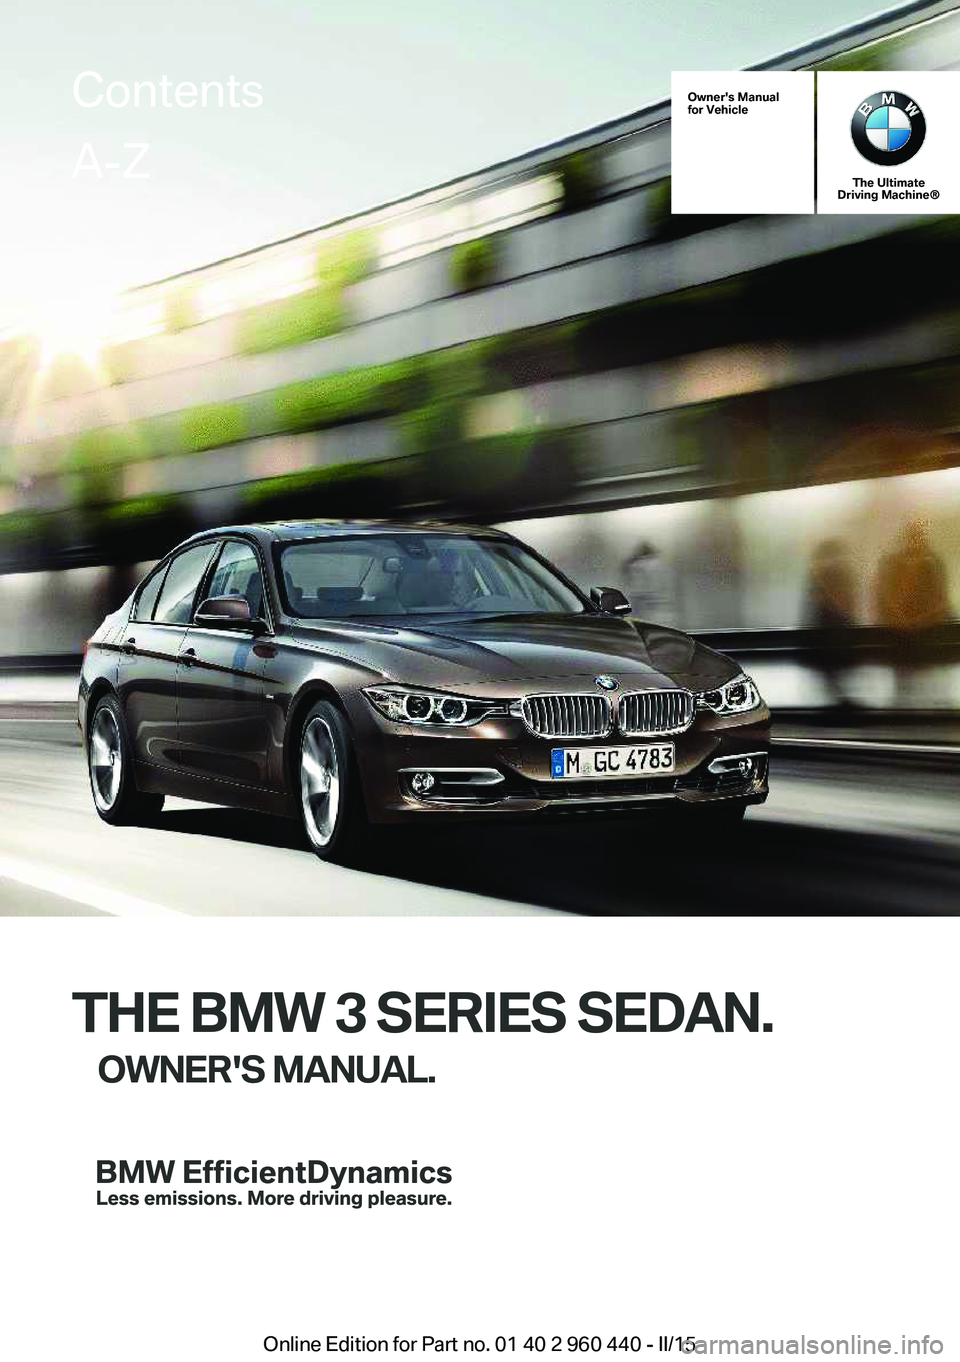 BMW 320i XDRIVE SEDAN 2015  Owners Manual Owner's Manual
for Vehicle
The Ultimate
Driving Machine®
THE BMW 3 SERIES SEDAN.
OWNER'S MANUAL.
ContentsA-Z
Online Edition for Part no. 01 40 2 960 440 - II/15   